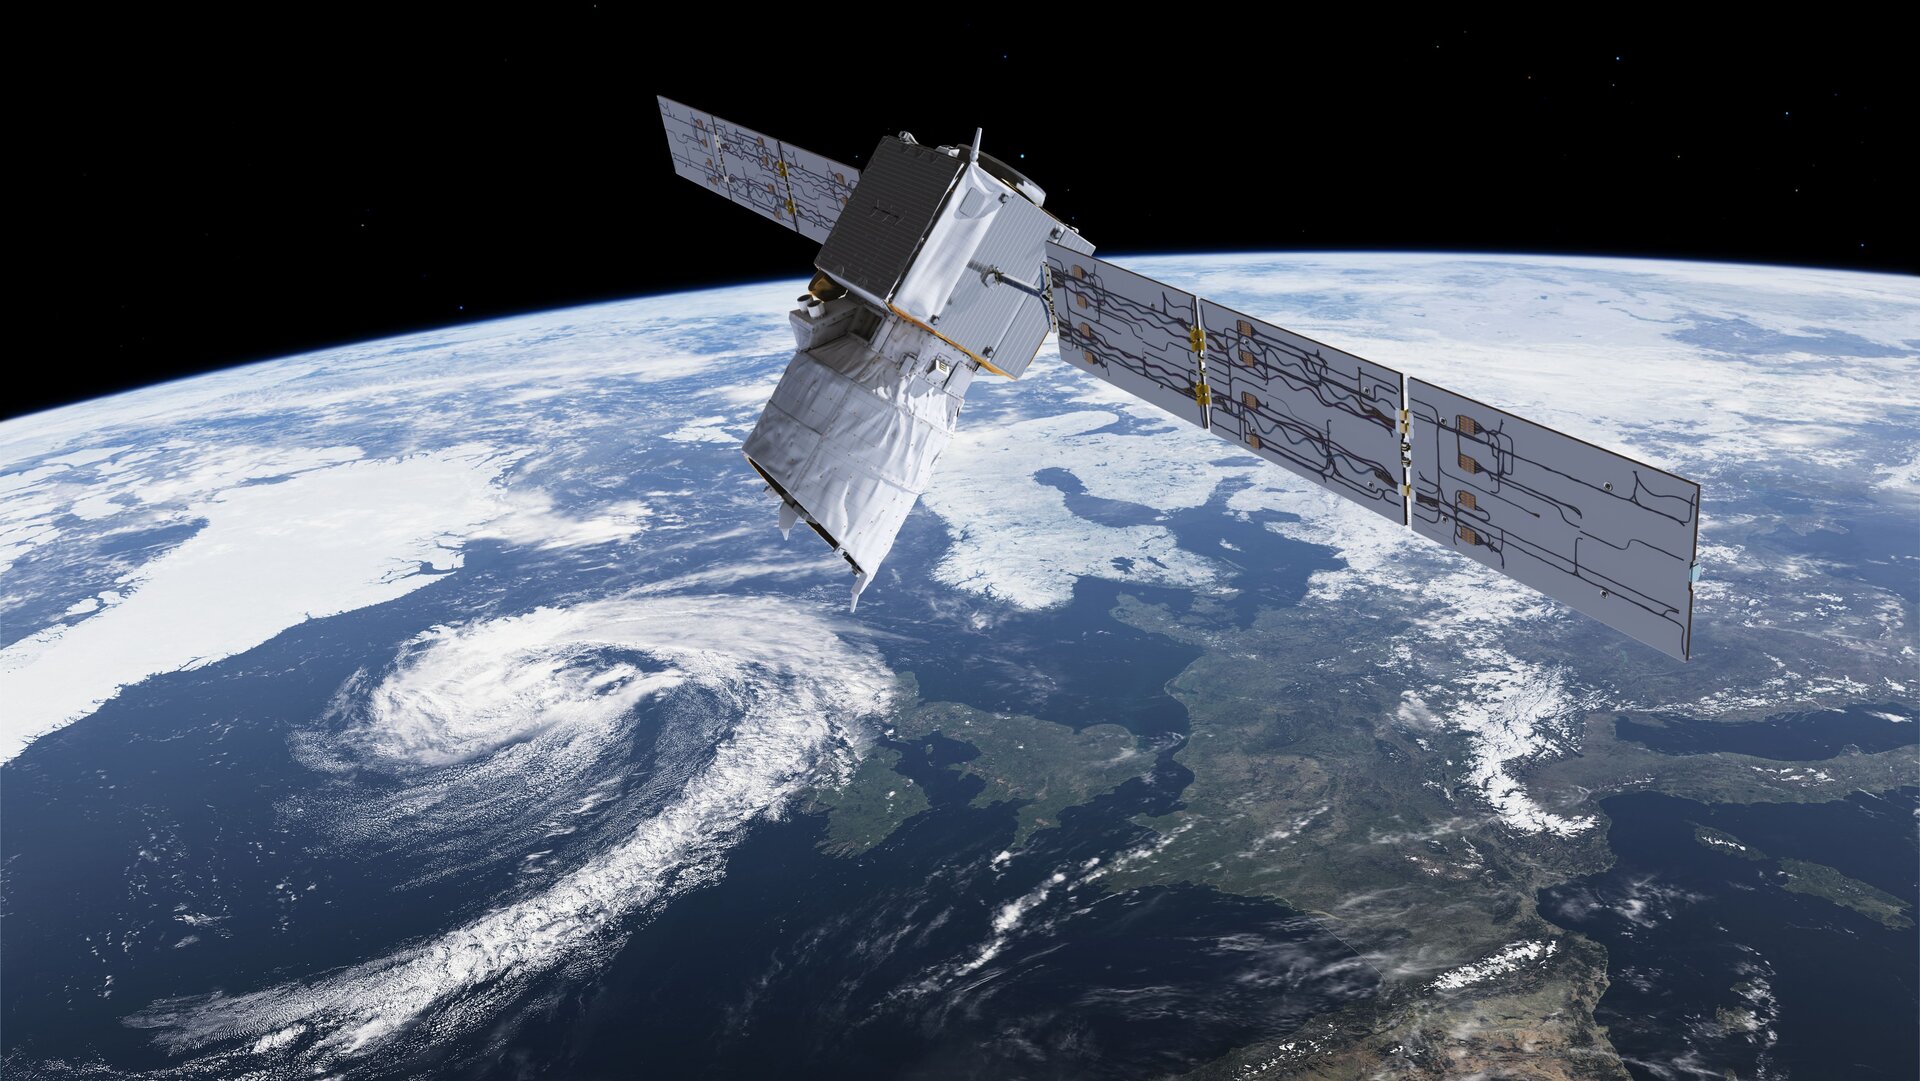 Aeolus was recently manoeuvred to avoid collision with a satellite in a constellation